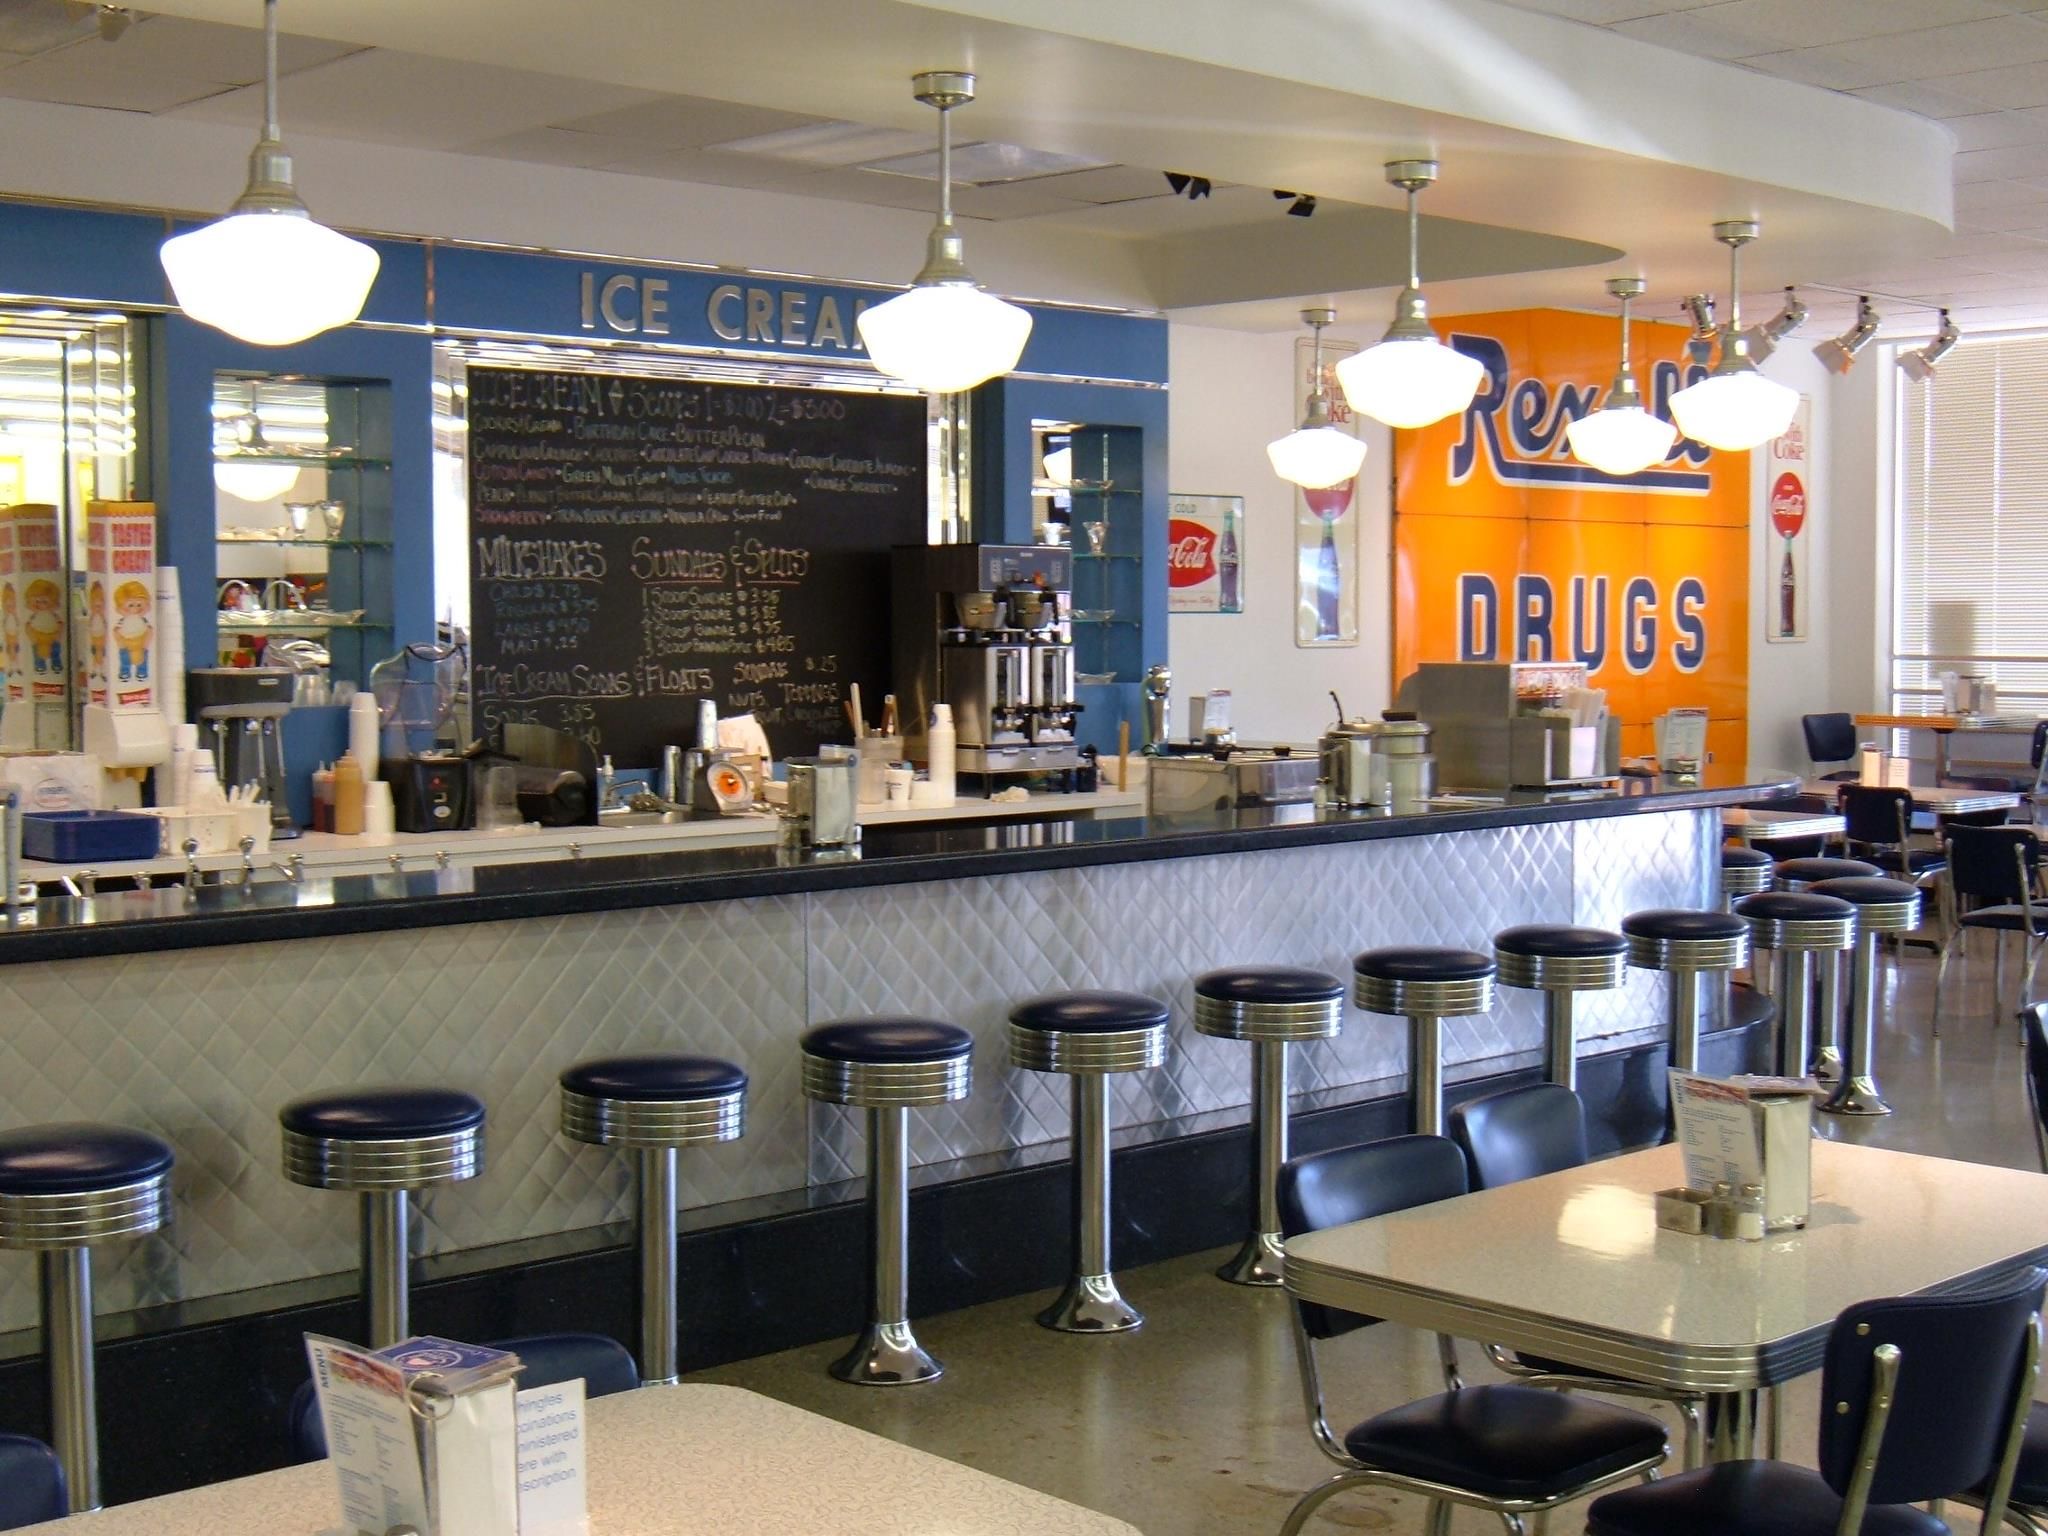 14 of the Most Charming Old-Fashioned Soda Fountains In America 